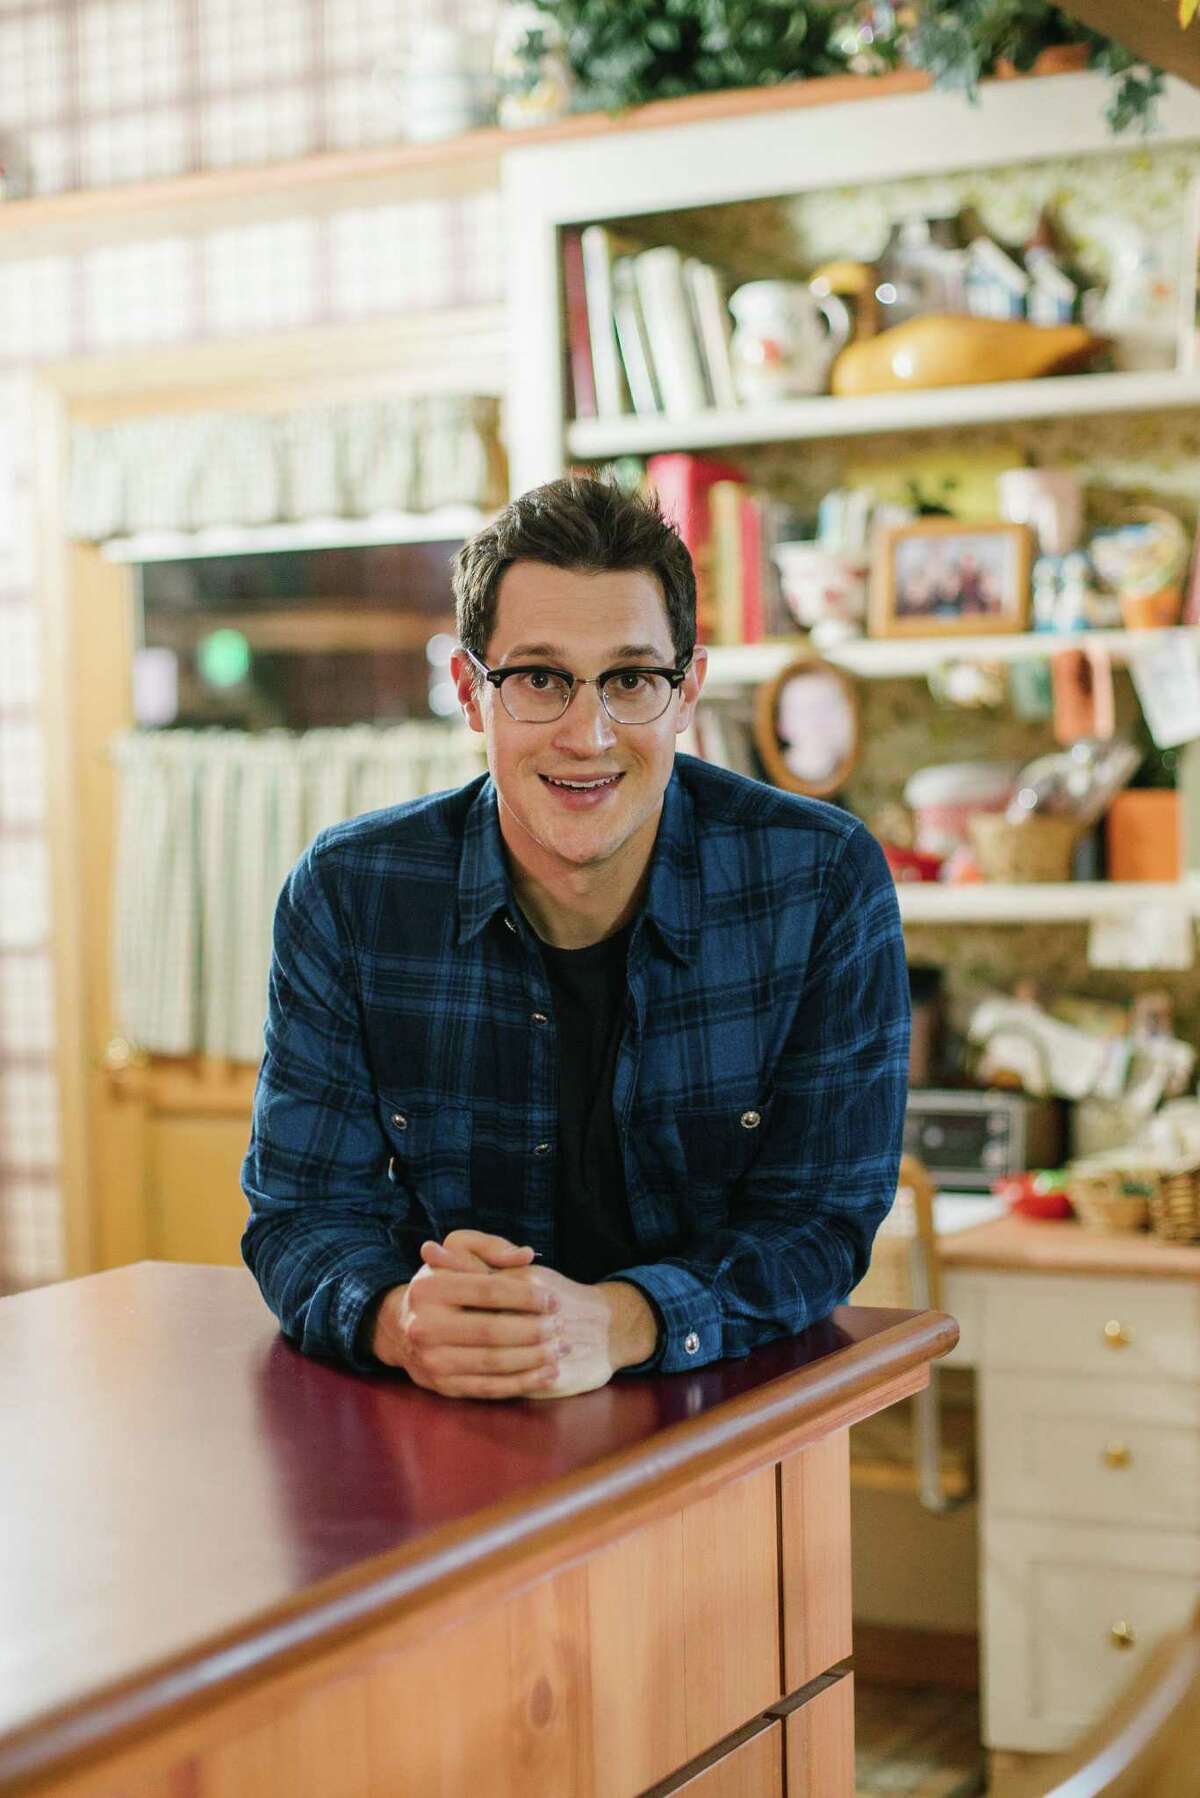 A one hour comedy special by Stamford native, Dan Levy will stream on Seeso beginning Nov. 17.